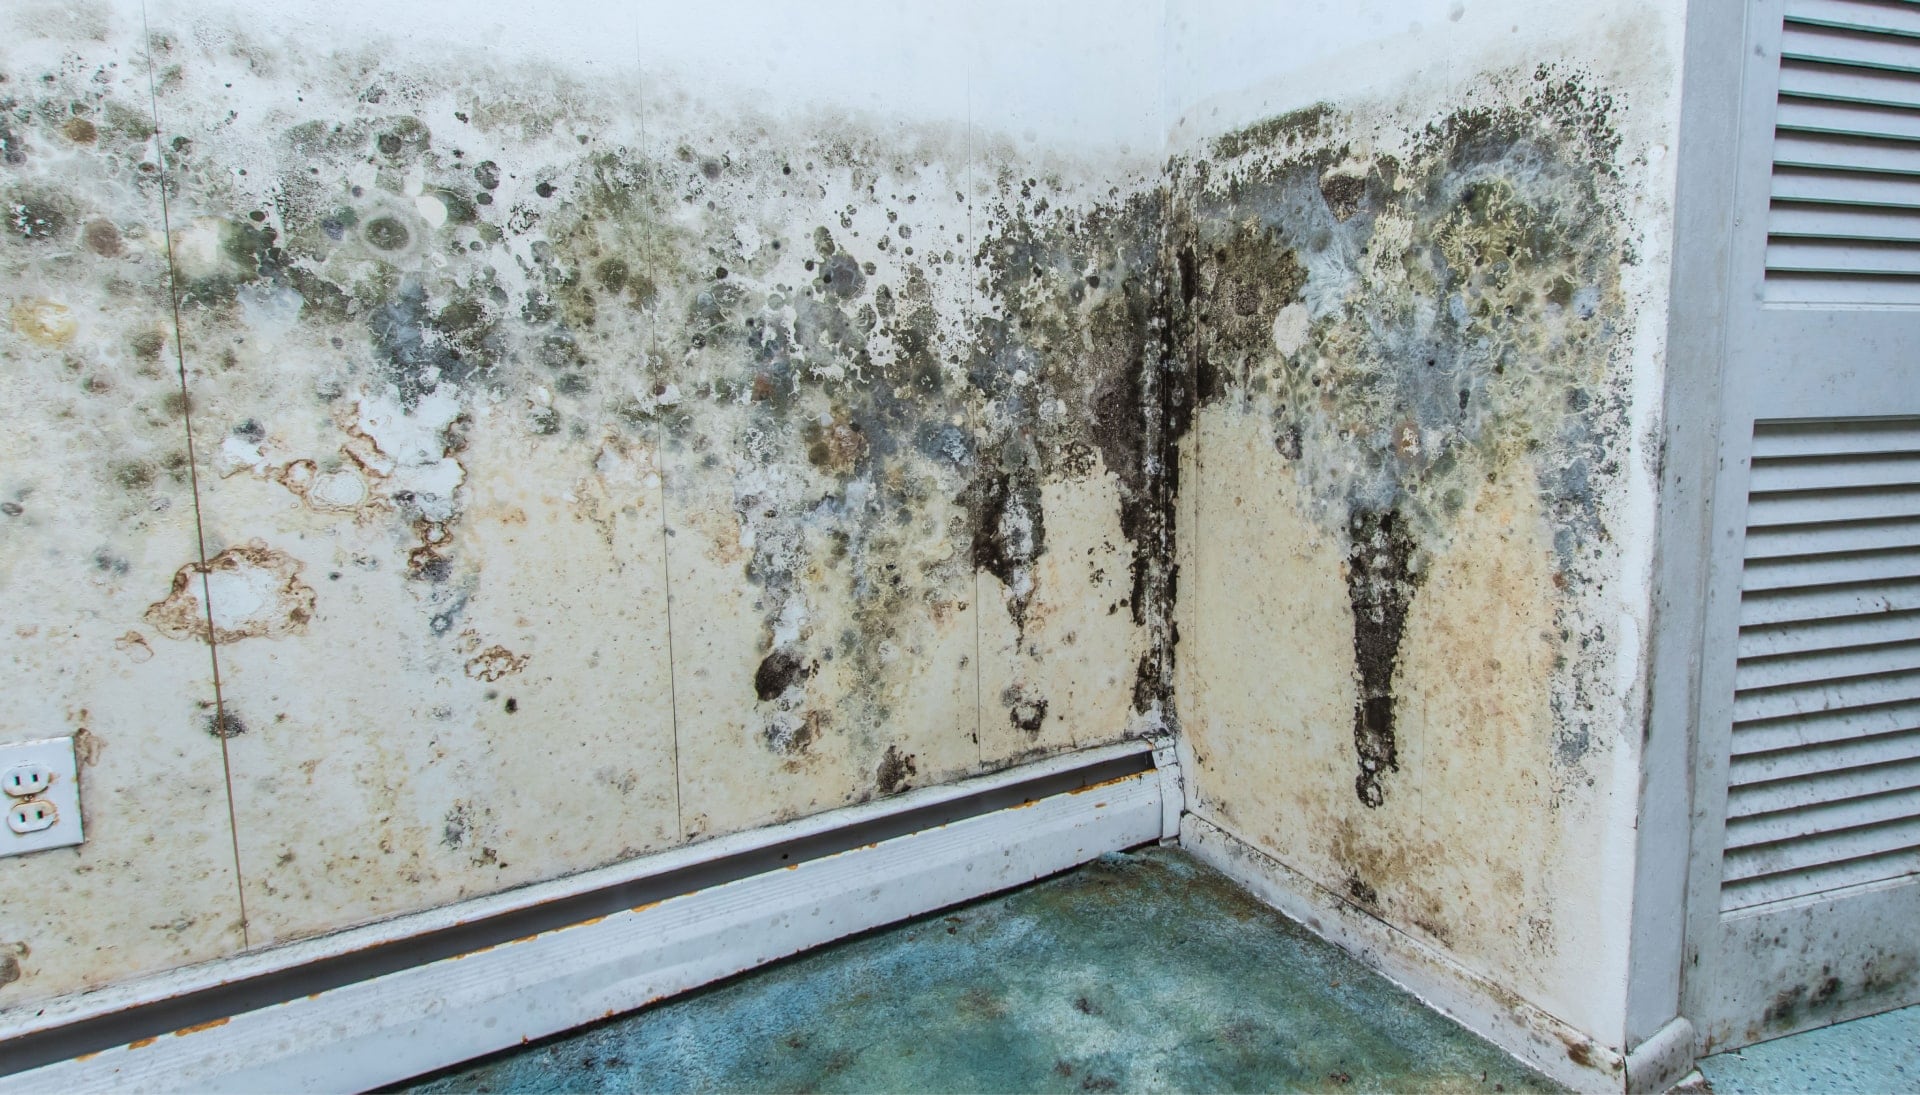 A mold remediation team using specialized techniques to remove mold damage and control odors in a Fort Worth property, with a focus on safety and efficiency